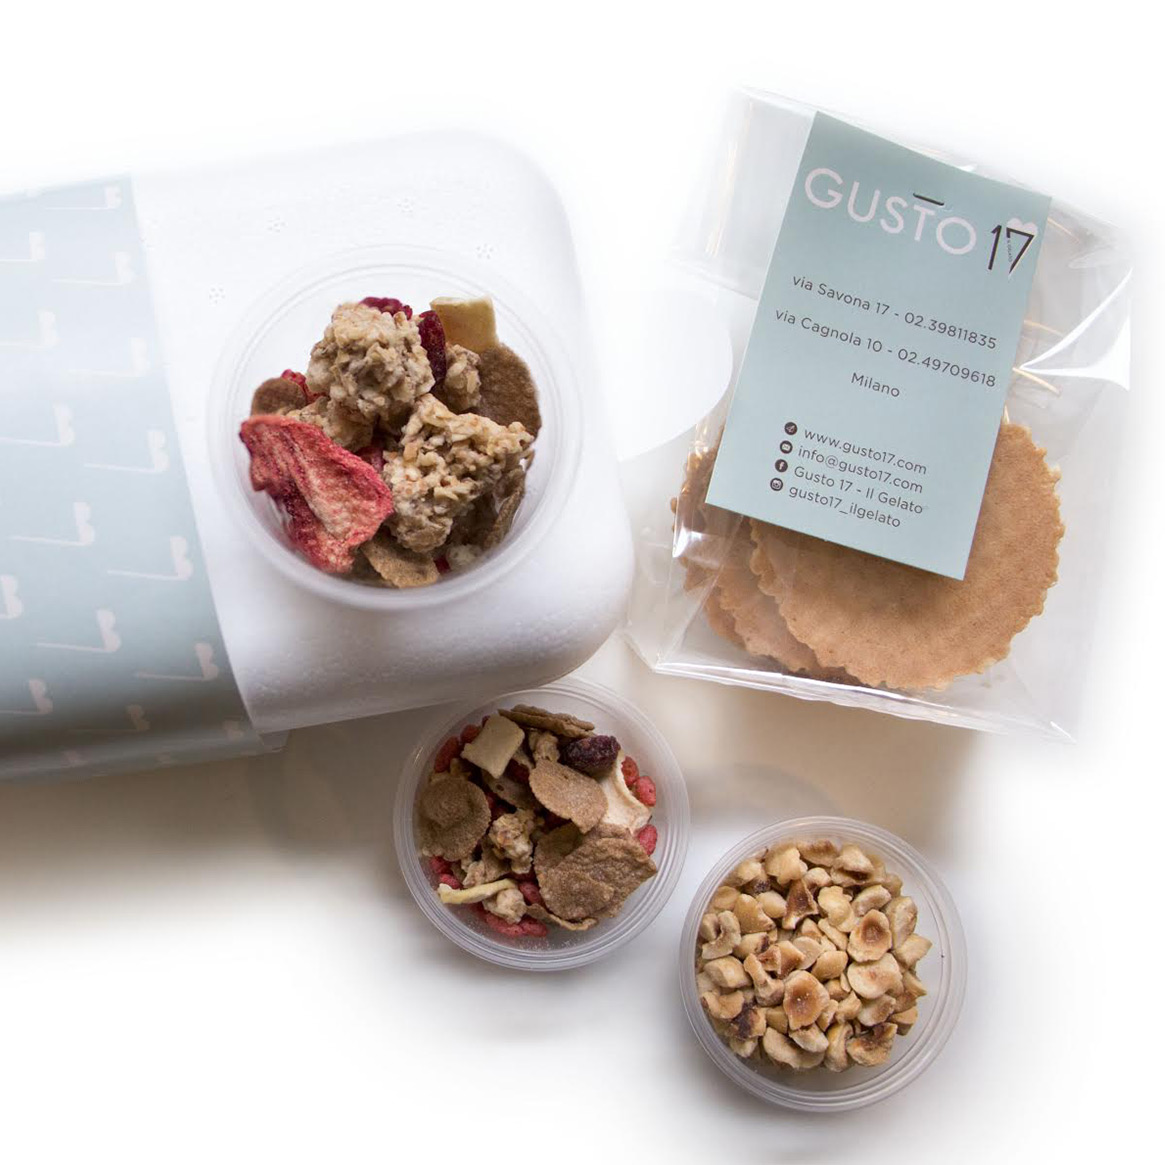 Gusto 17 delivery